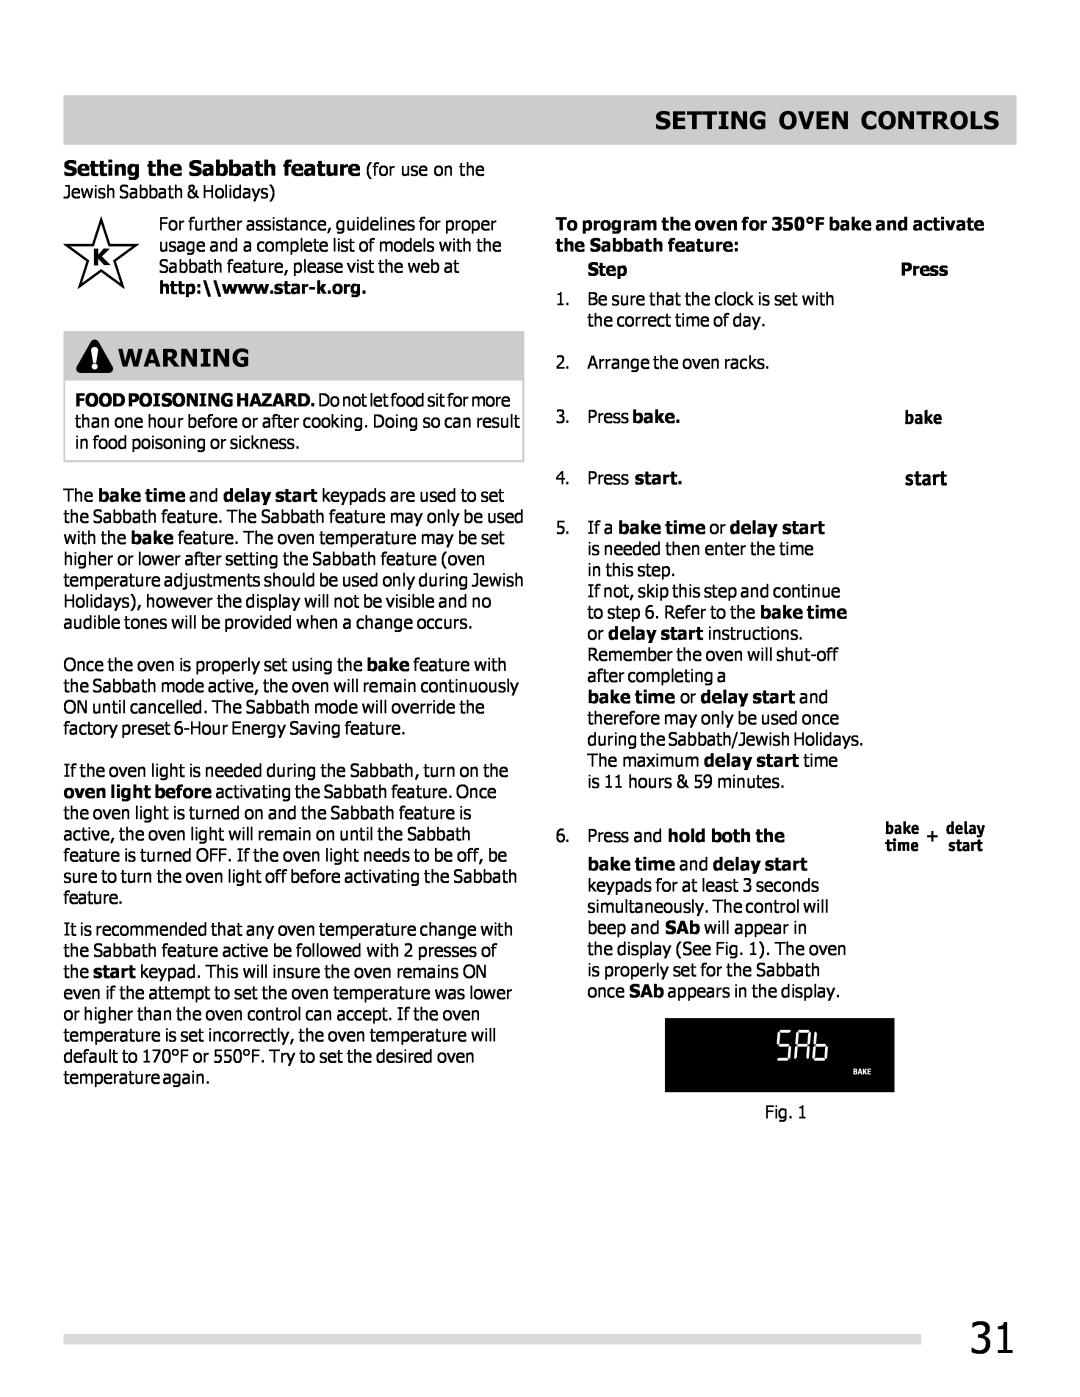 Frigidaire FPEF3081MF important safety instructions Setting the Sabbath feature for use on the, Setting Oven Controls 